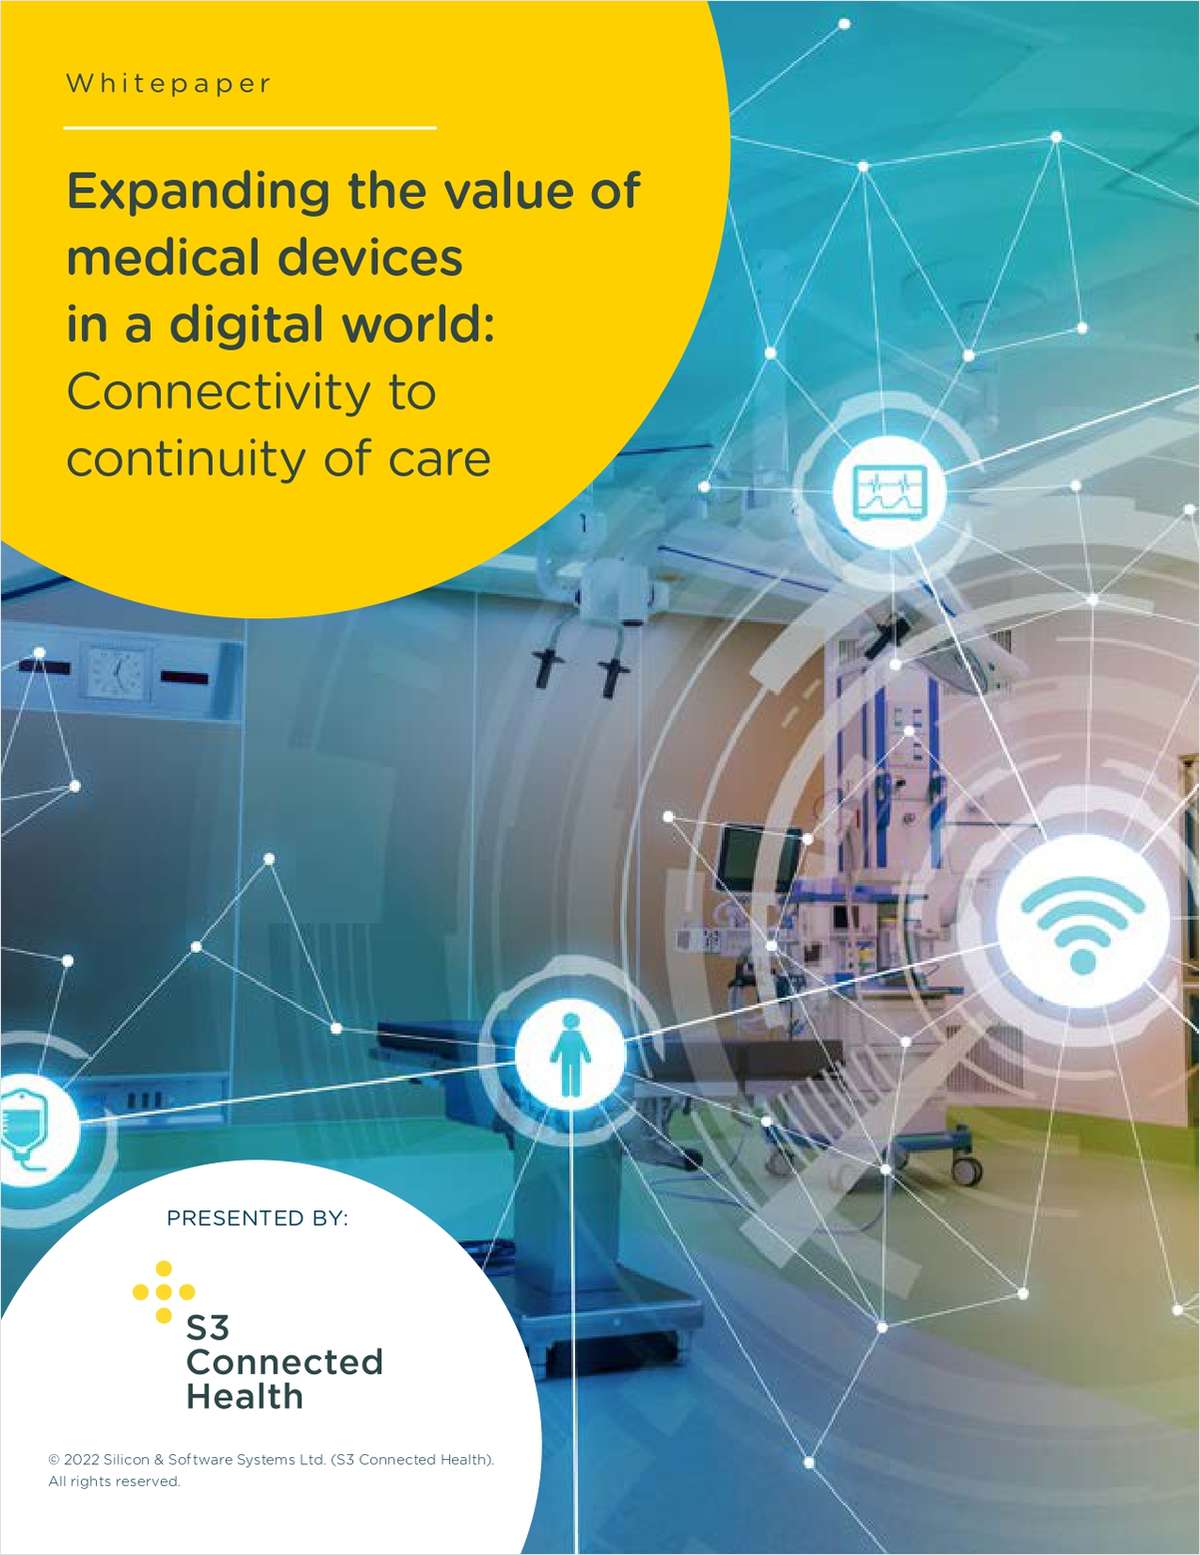 Expanding the Value of Medical Devices in a Digital World